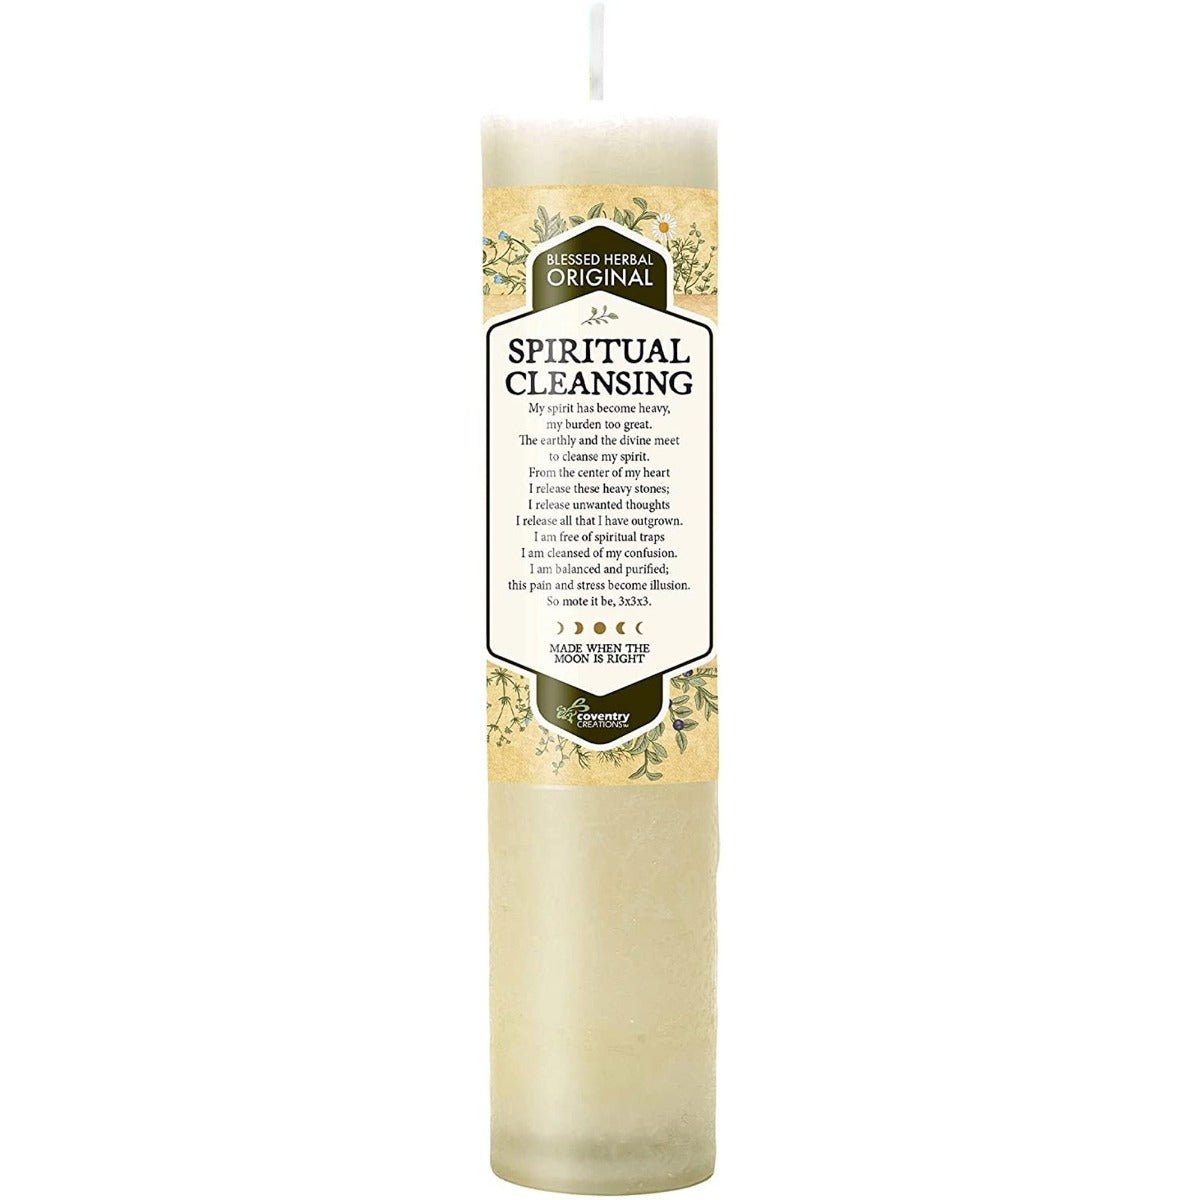 Blessed Herbal Spiritual Cleansing Candle - 13 Moons